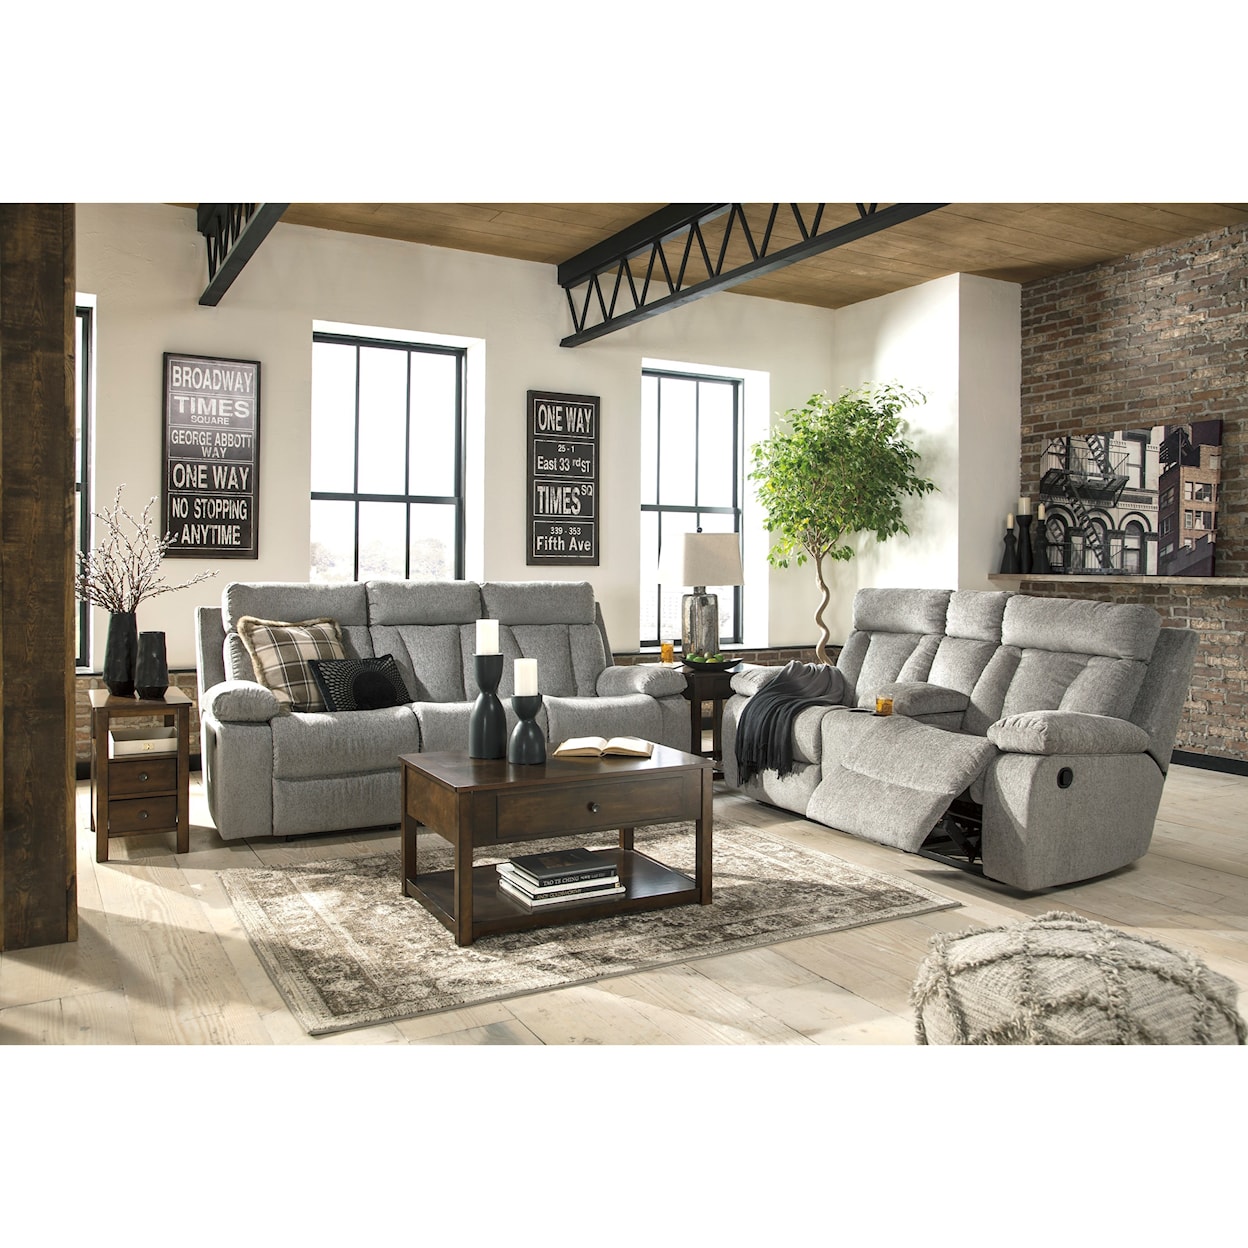 Michael Alan Select Mitchiner Reclining Living Room Group